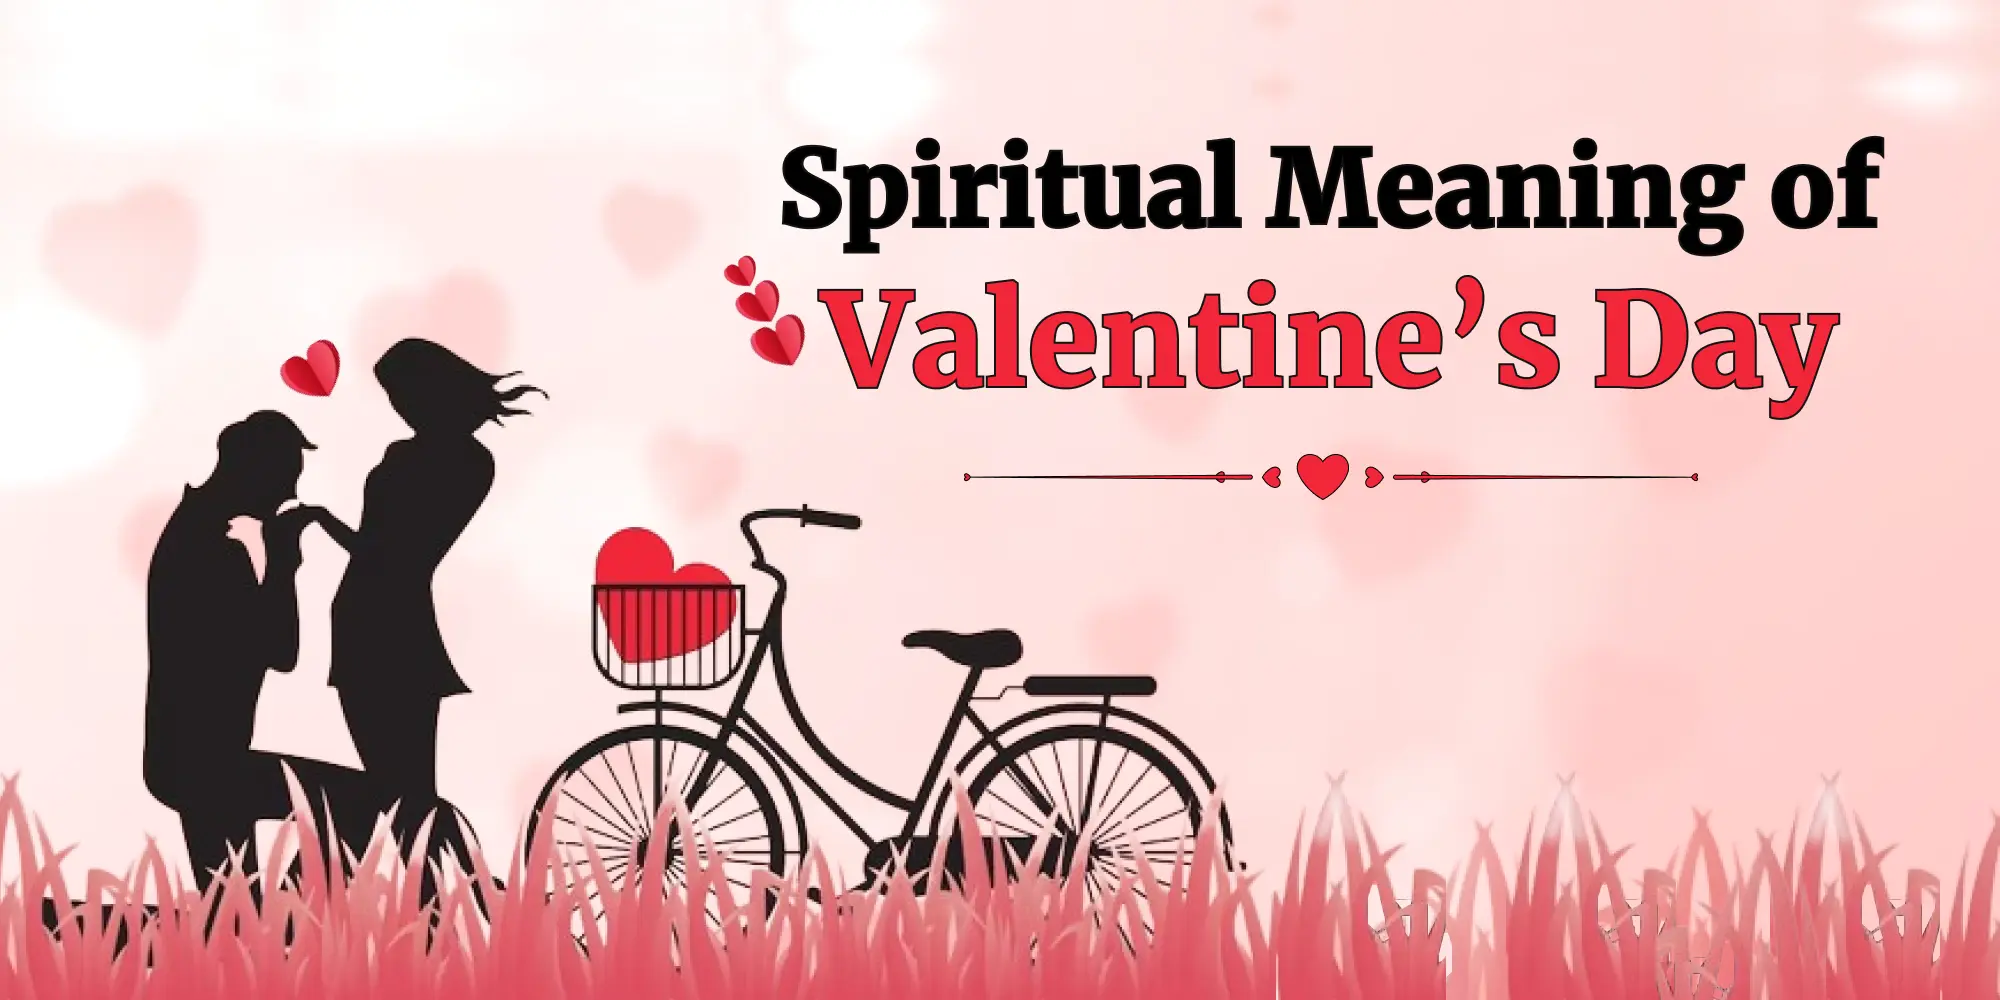 Spiritual Meaning of Valentine's Day